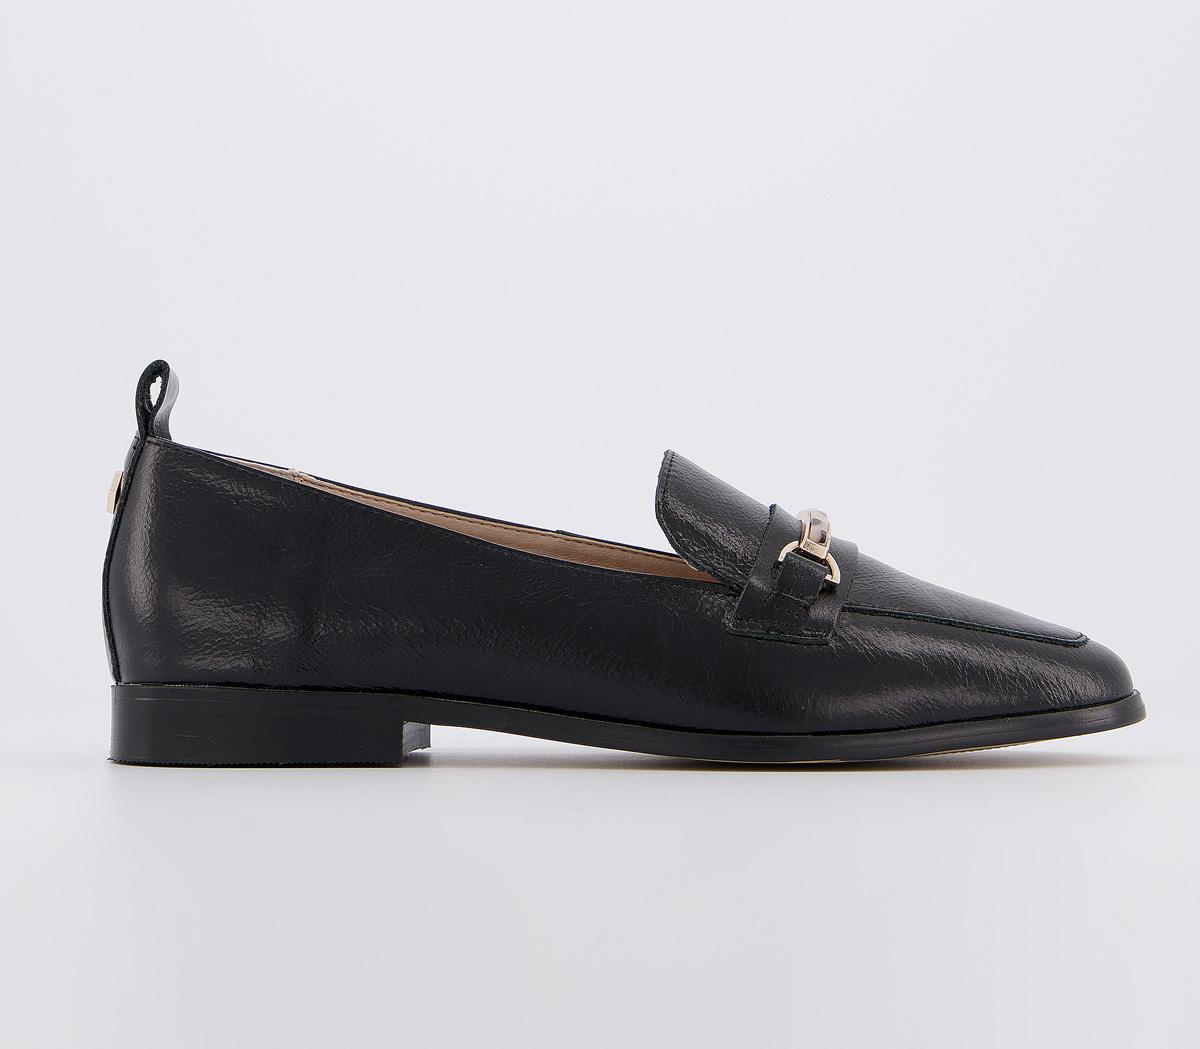 OFFICE Few Feature Trim Loafers Black Leather - Women’s Loafers